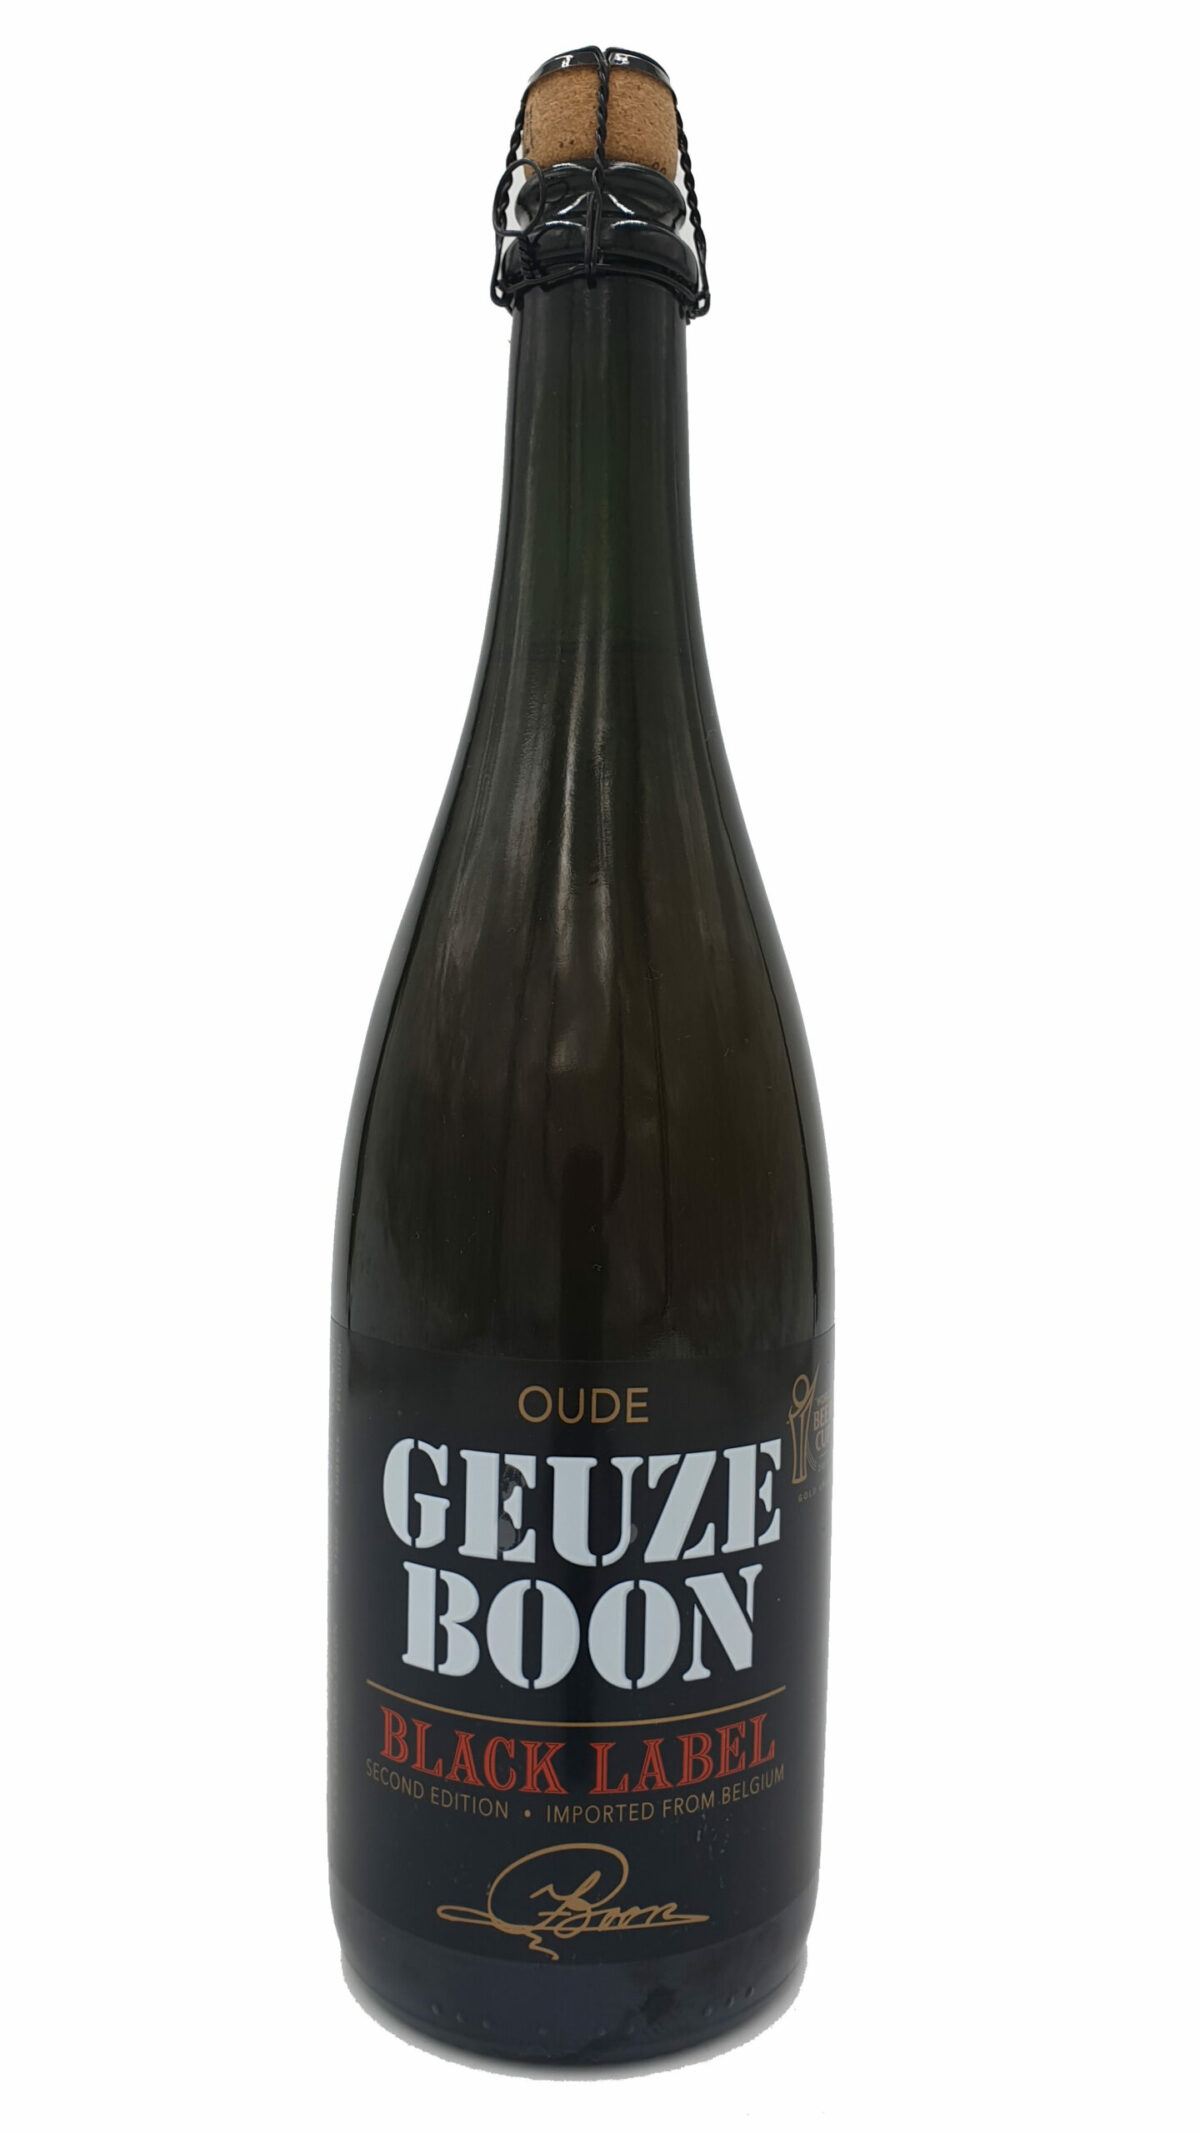 boon oude geuze black label edition 2